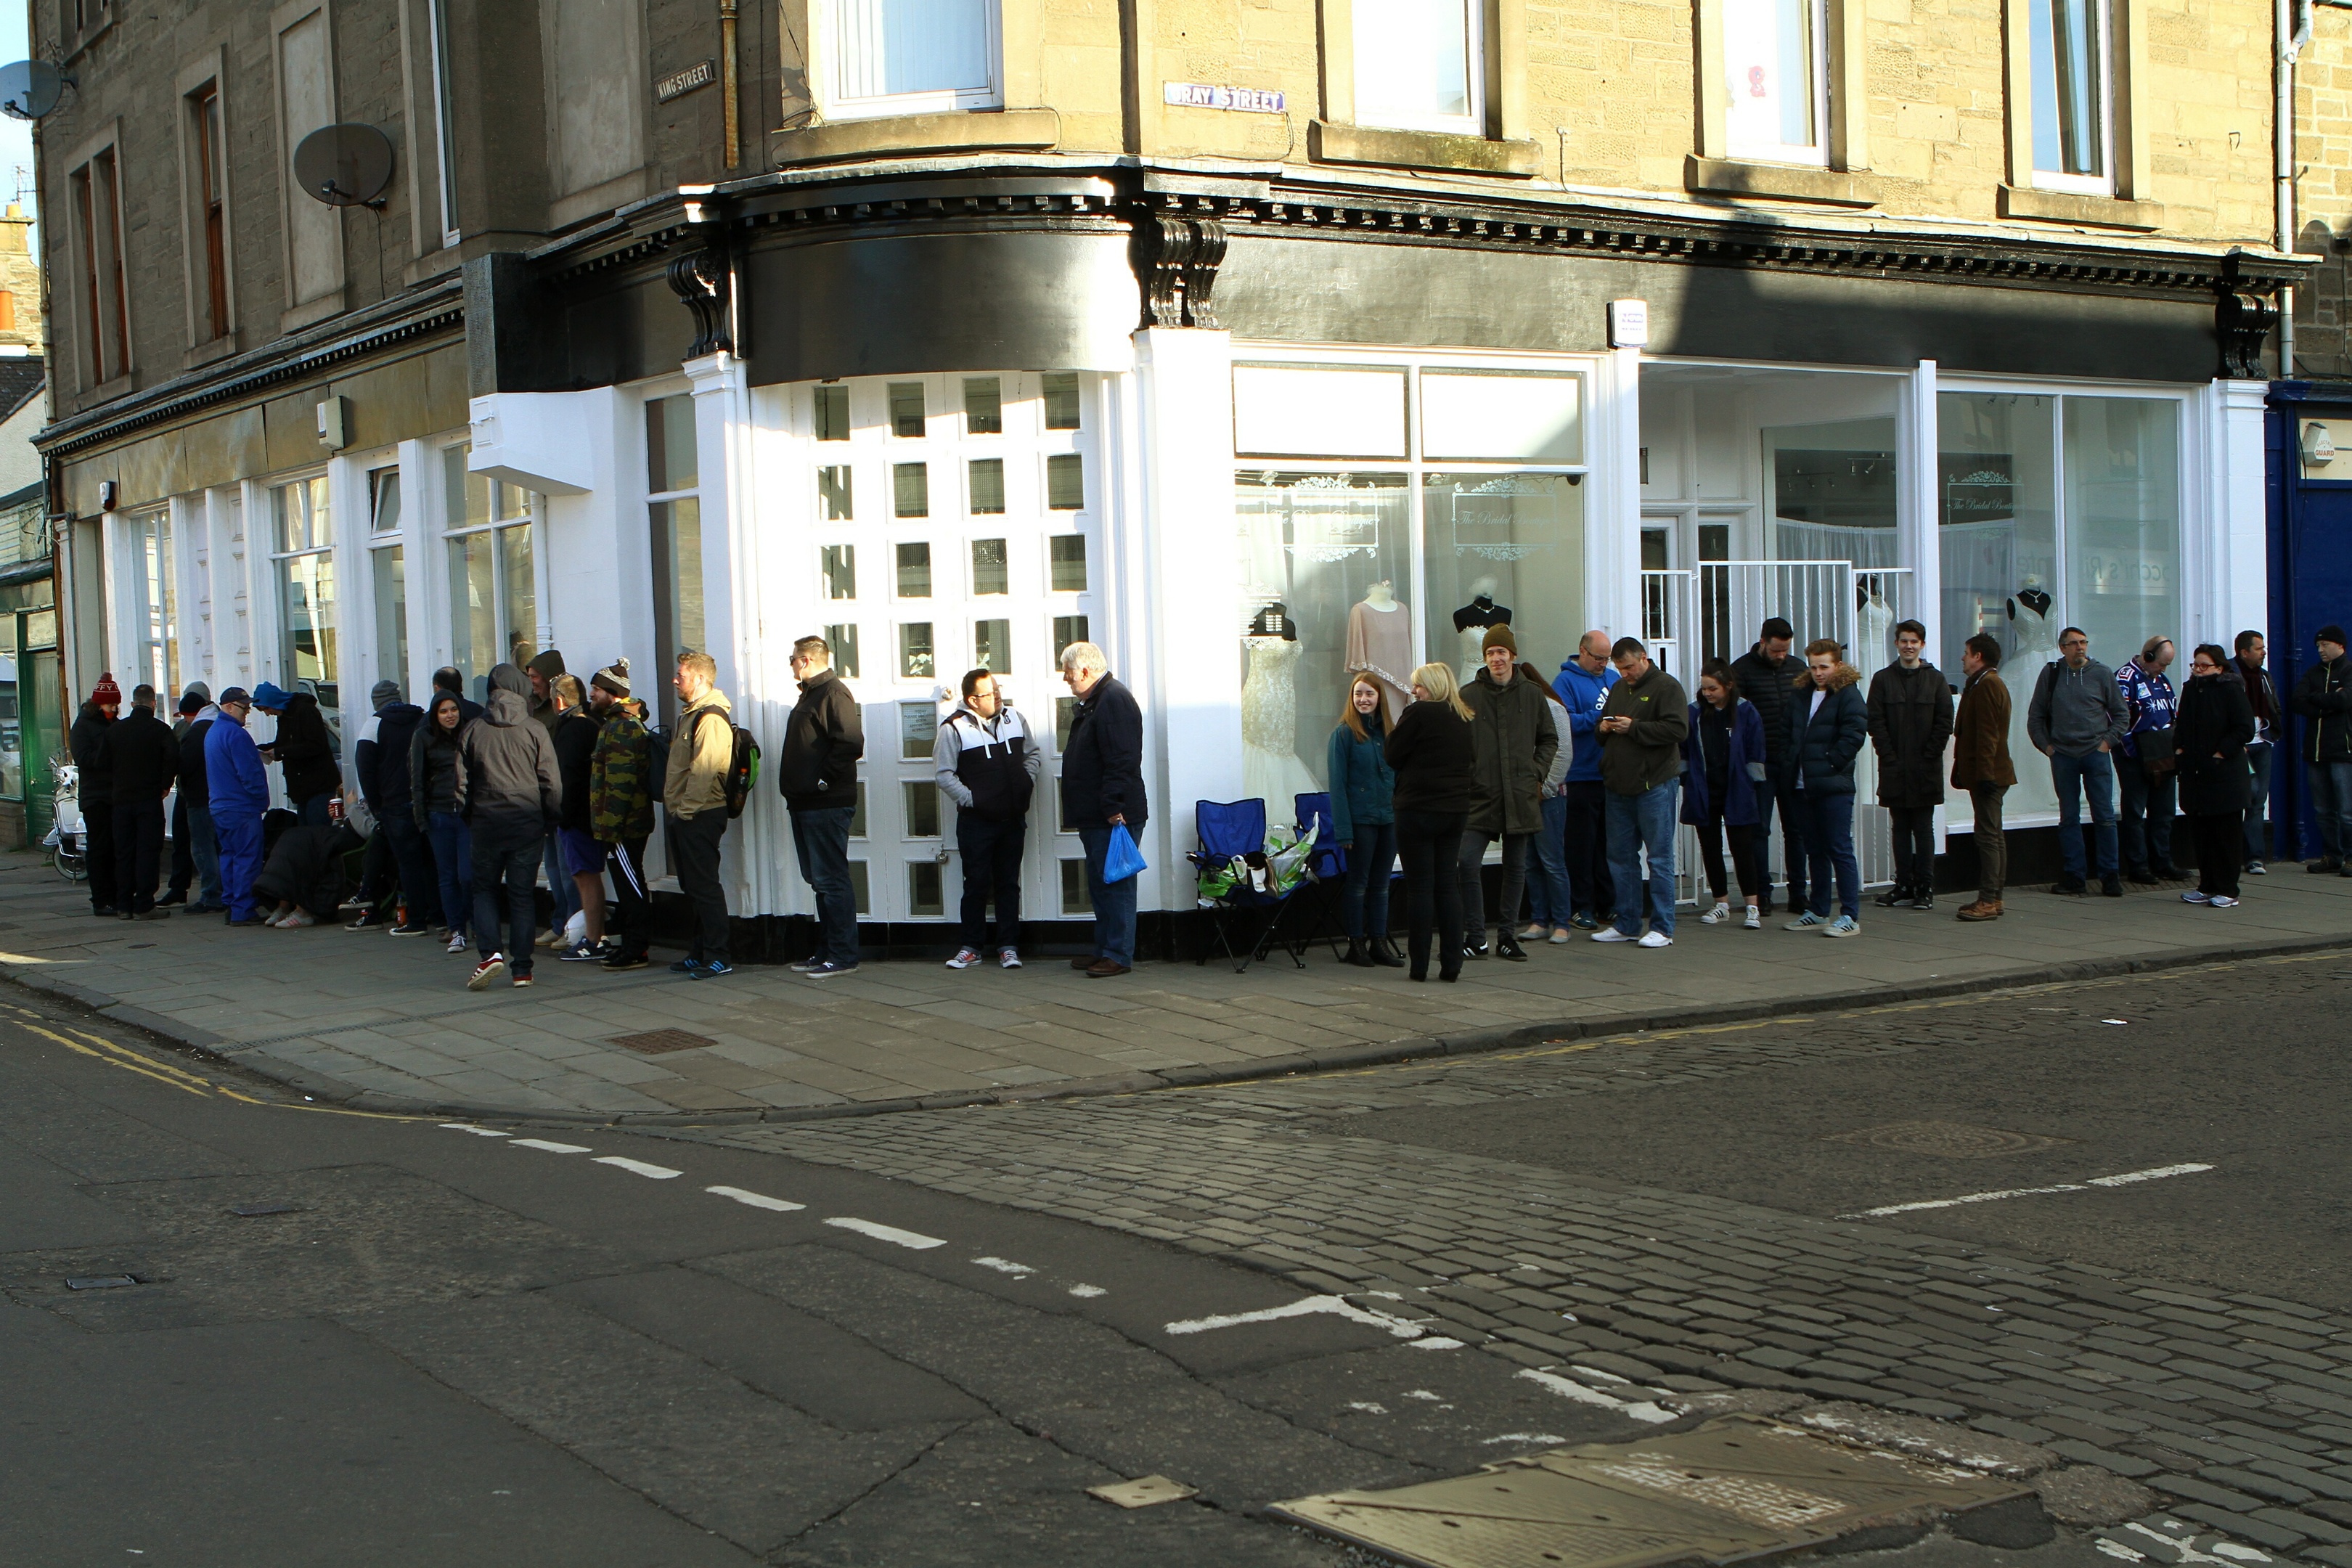 The crowds in Broughty Ferry on Record Store Day.